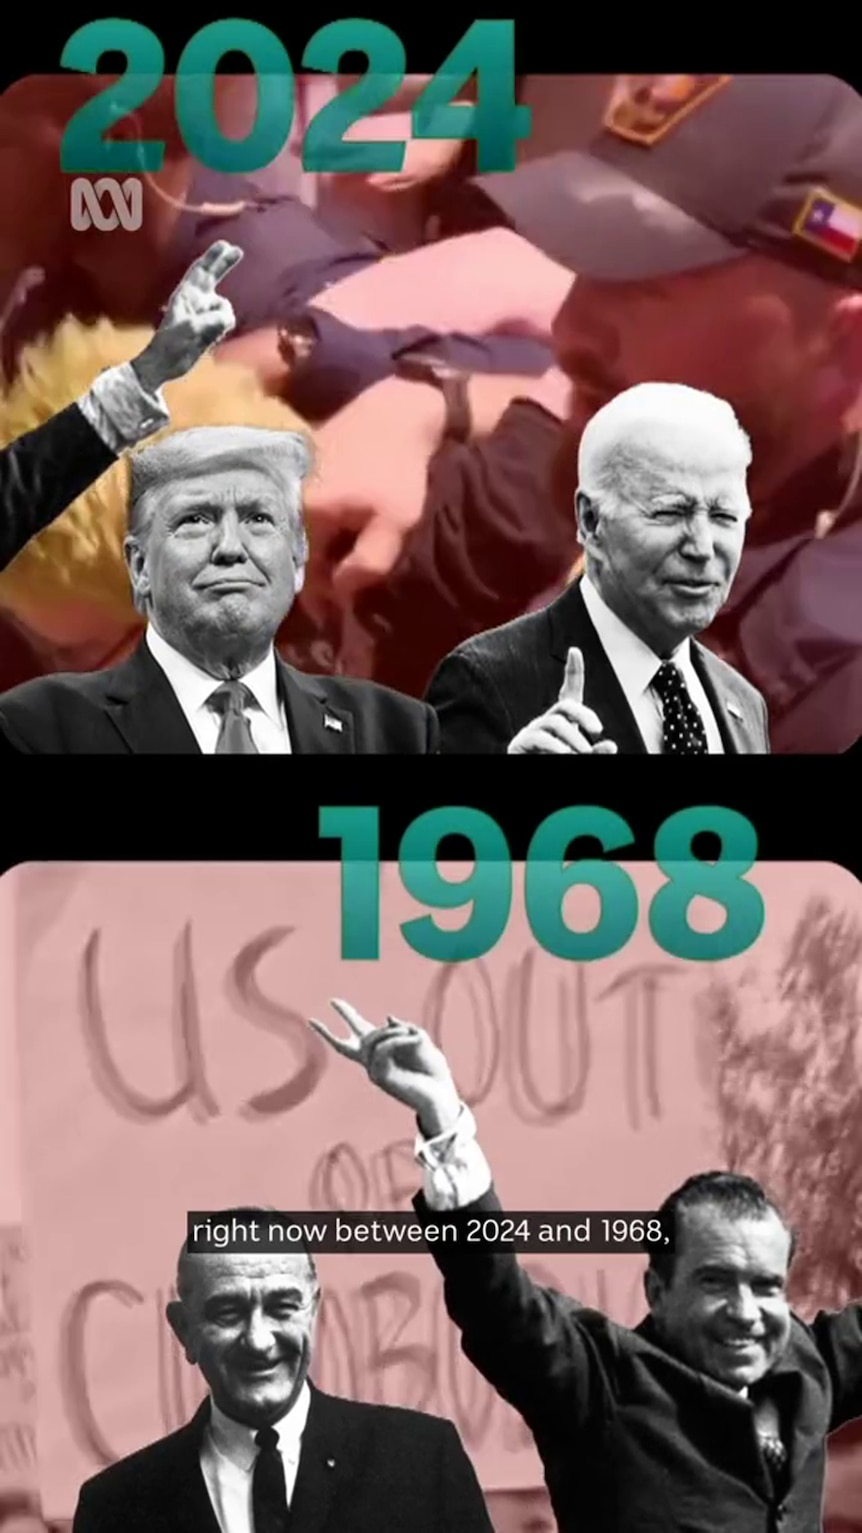 Composite image shows Trump and Biden's faces under 2024 and Nixon and Humphrey under 1968